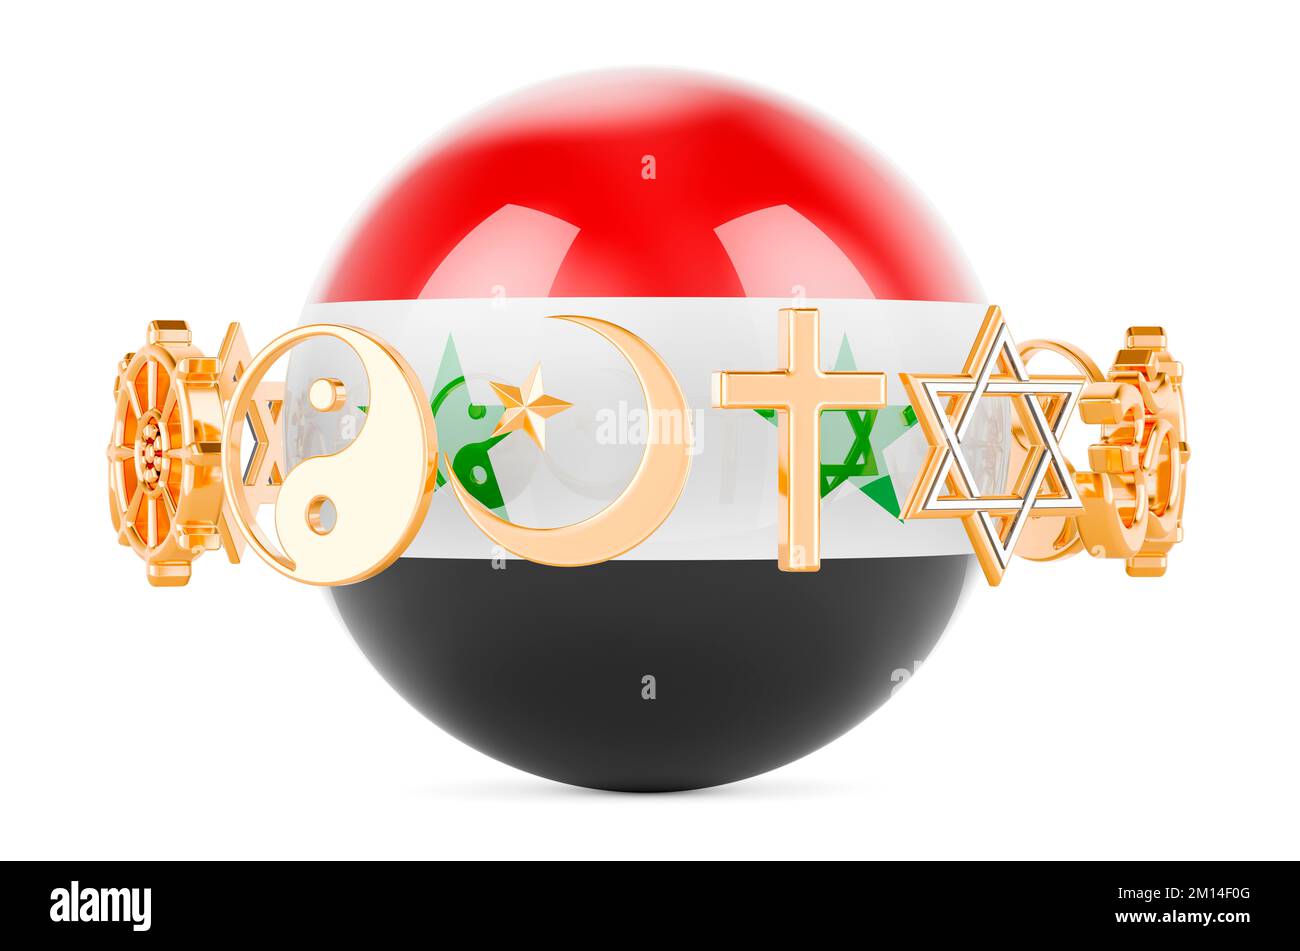 Syrian flag painted on sphere with religions symbols around, 3D rendering isolated on white background Stock Photo